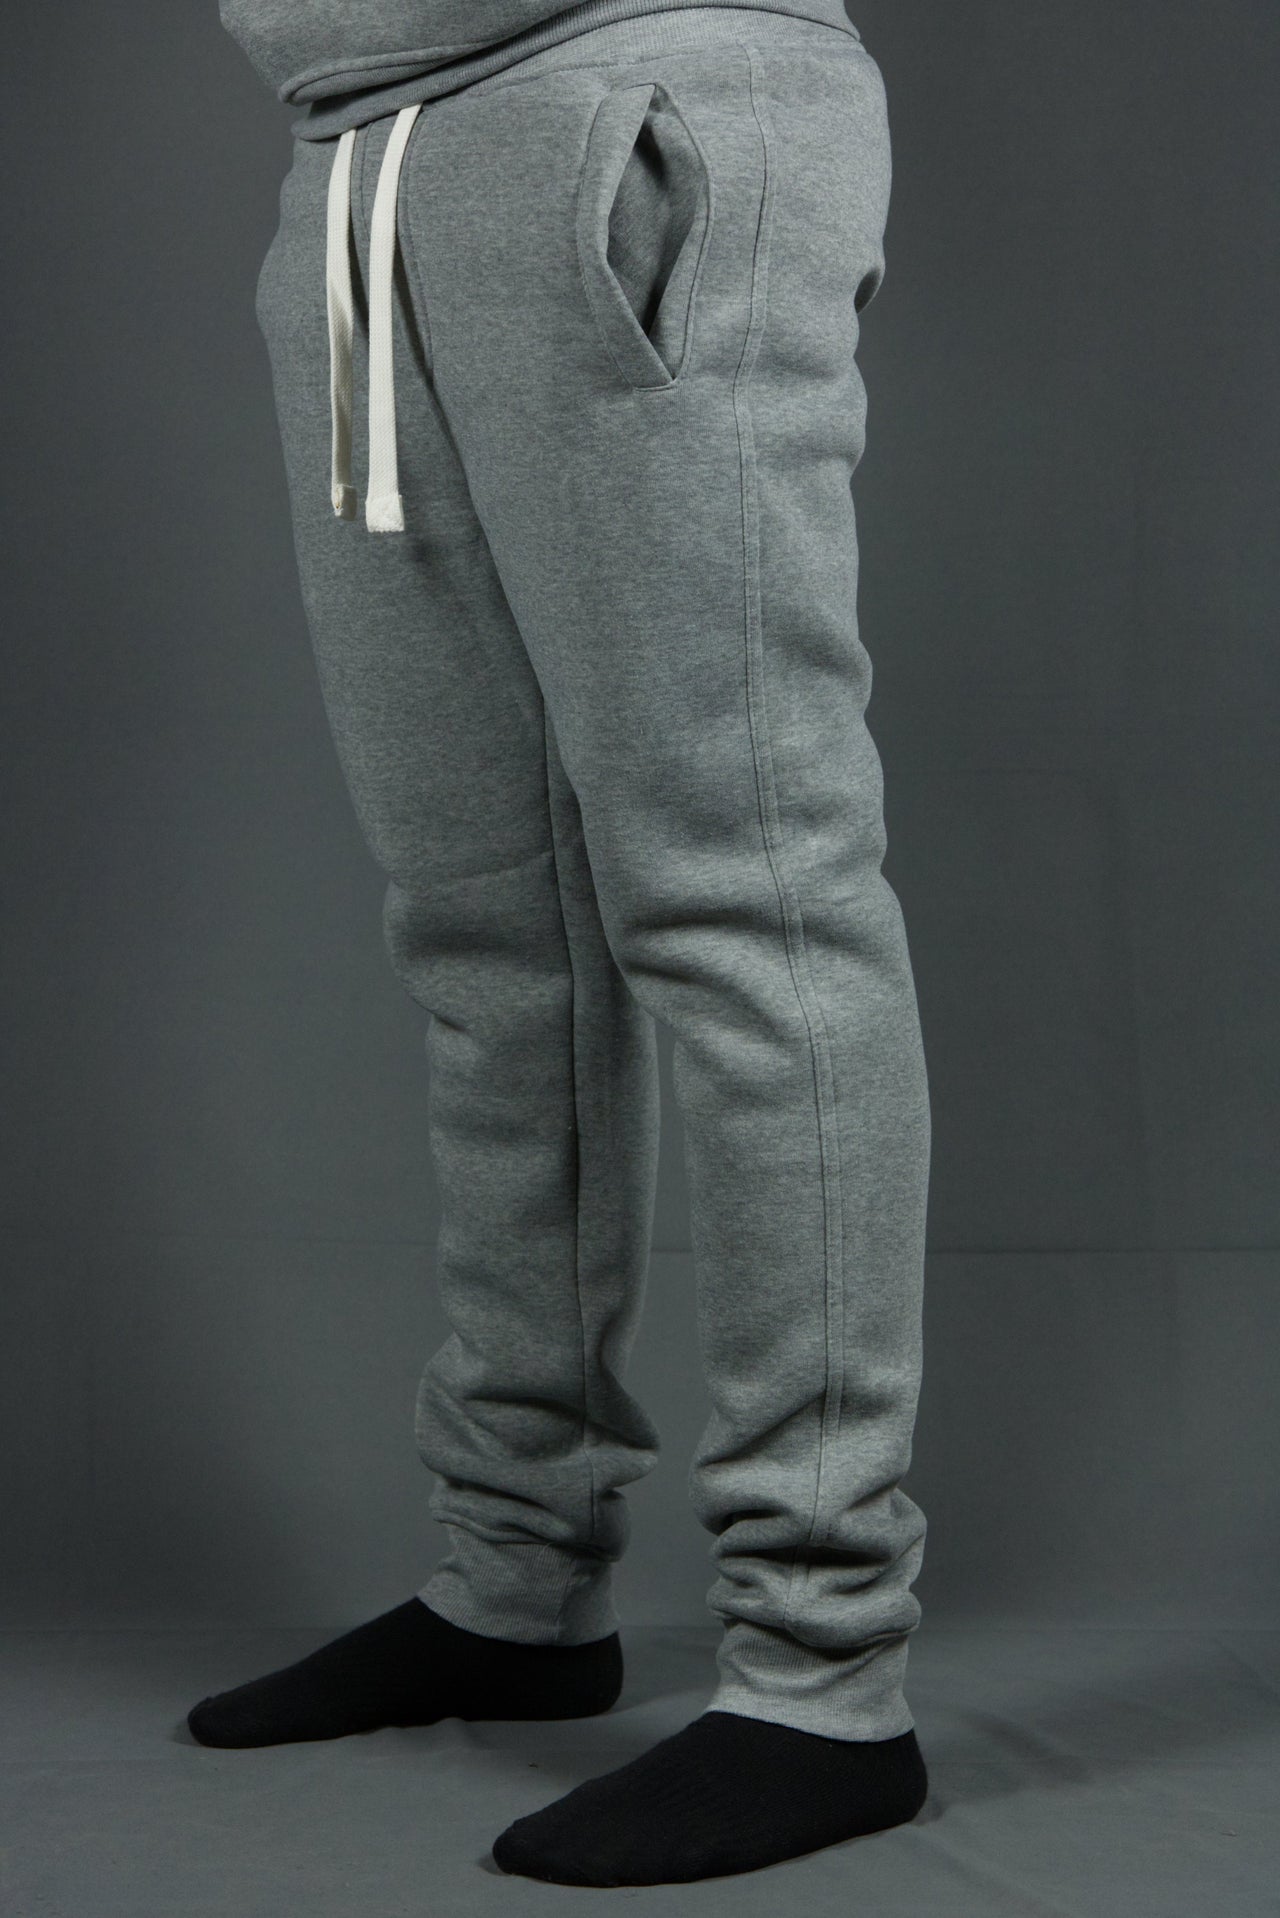 The bottom cuffs of these basic fleece heather grey sweatpants feature two spacious front pockets